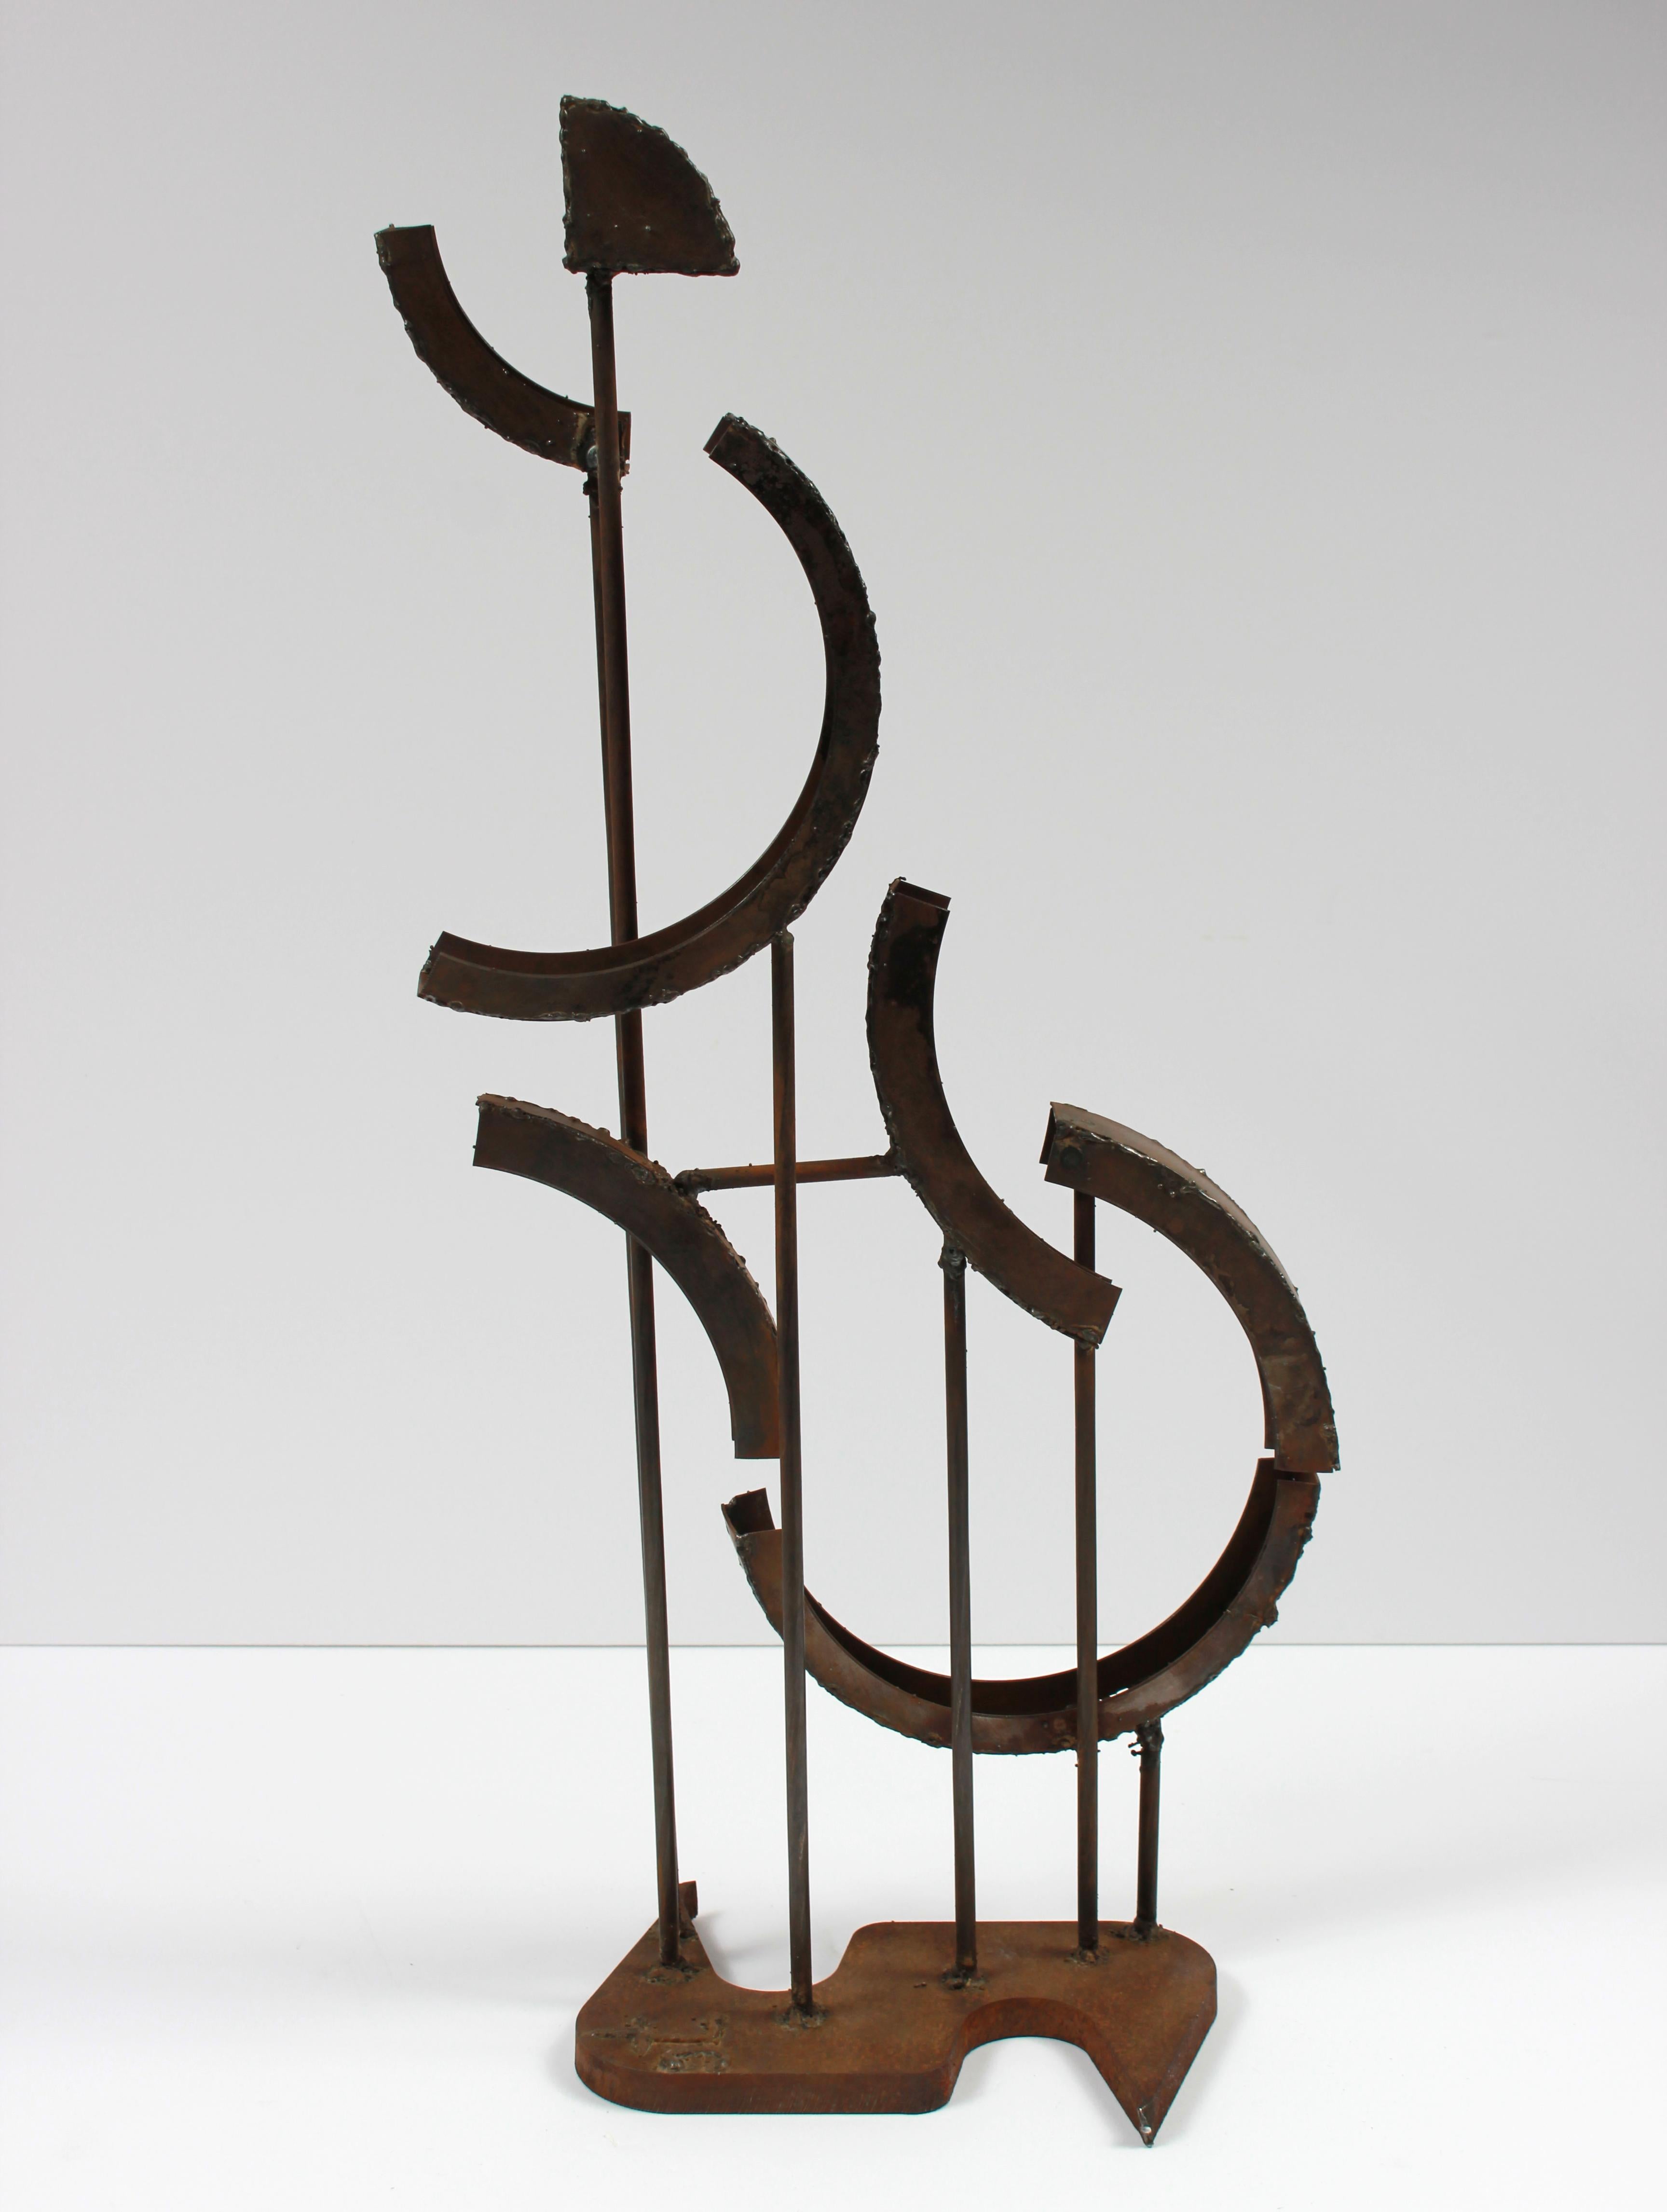 Multimedia Welded Metal Geometric Sculpture, Late 20th Century - Gray Abstract Sculpture by Unknown